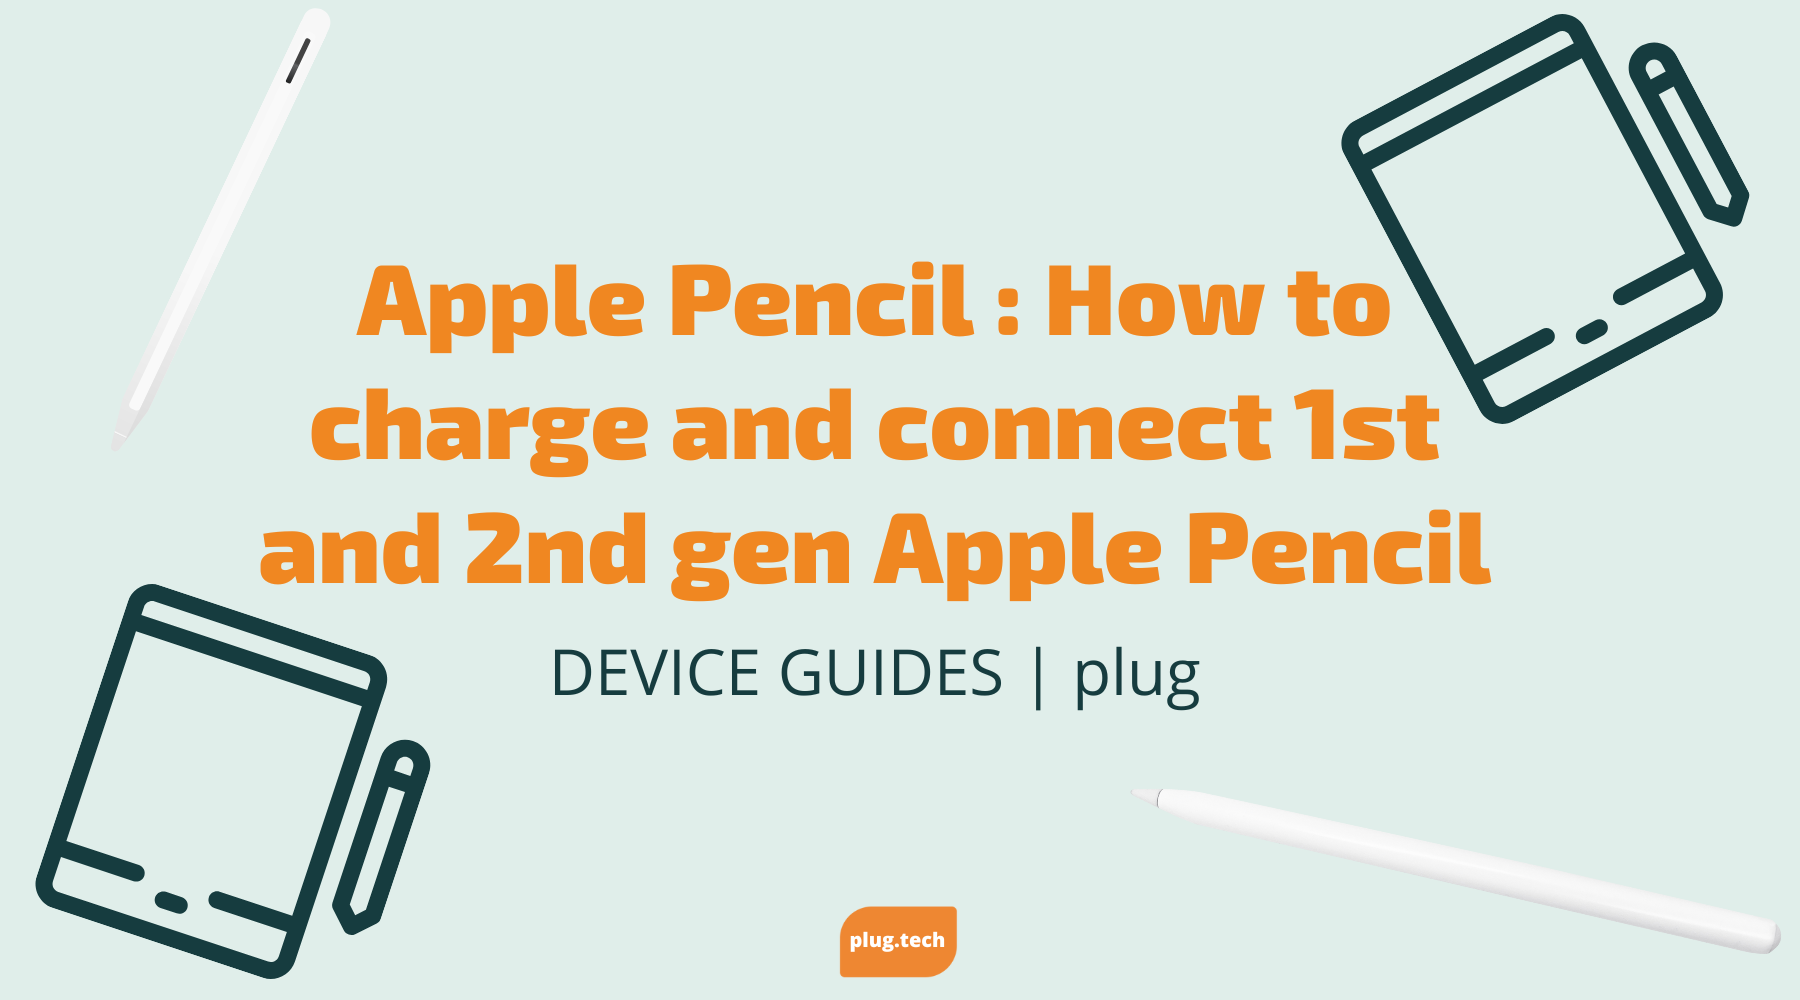 Apple Pencil Guide: How to charge and connect 1st and 2nd gen Apple Pencil